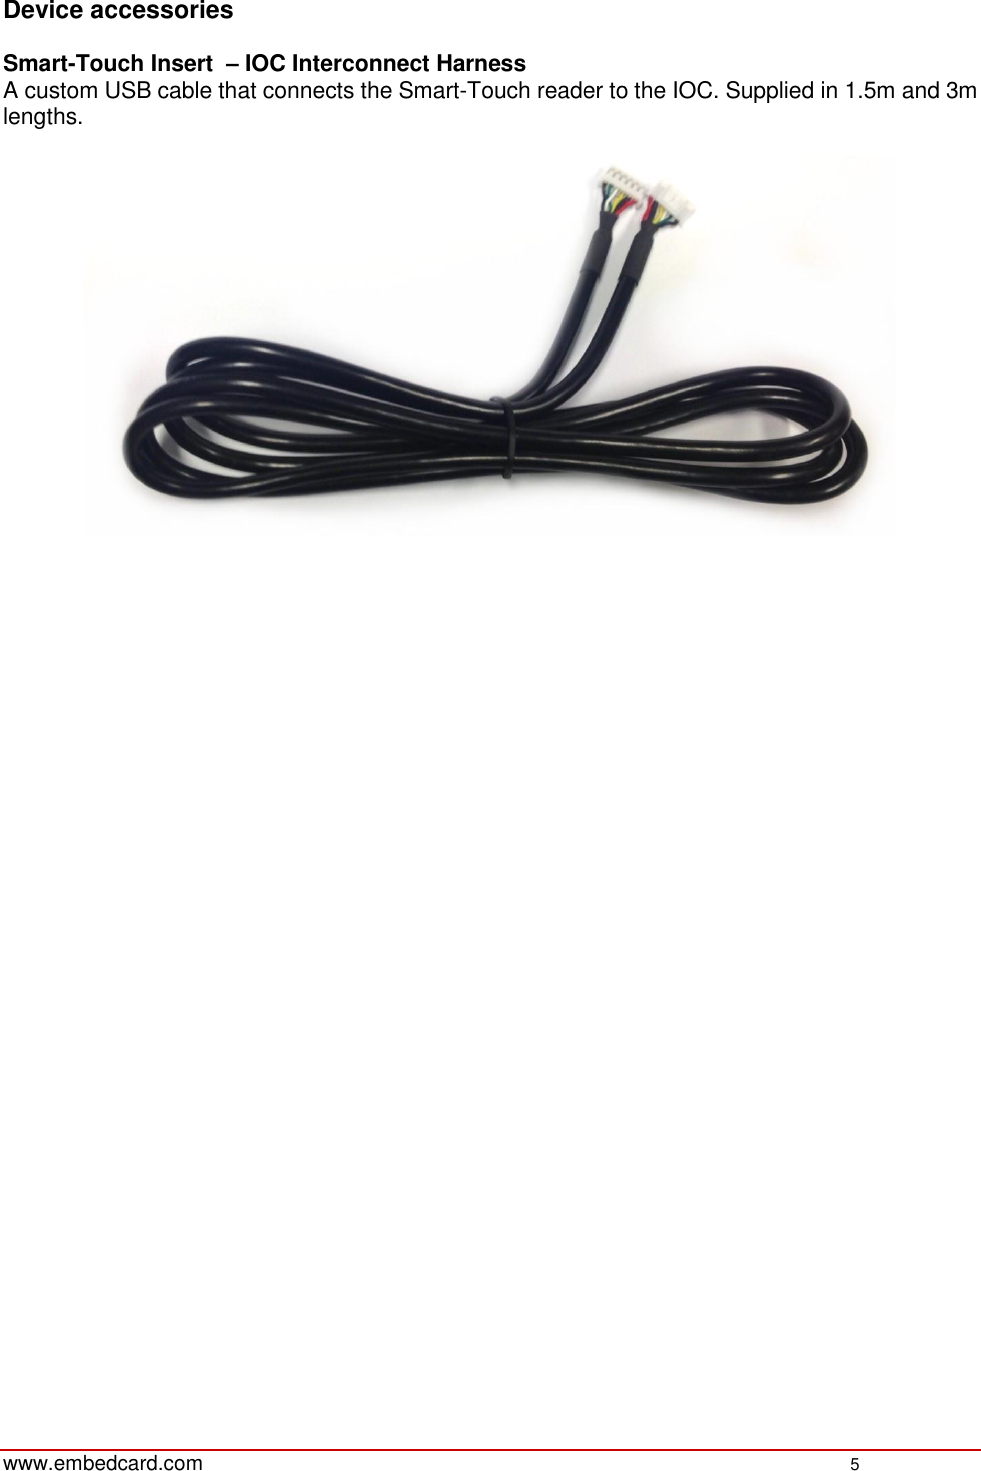   www.embedcard.com    5   Device accessories  Smart-Touch Insert  – IOC Interconnect Harness A custom USB cable that connects the Smart-Touch reader to the IOC. Supplied in 1.5m and 3m lengths.         